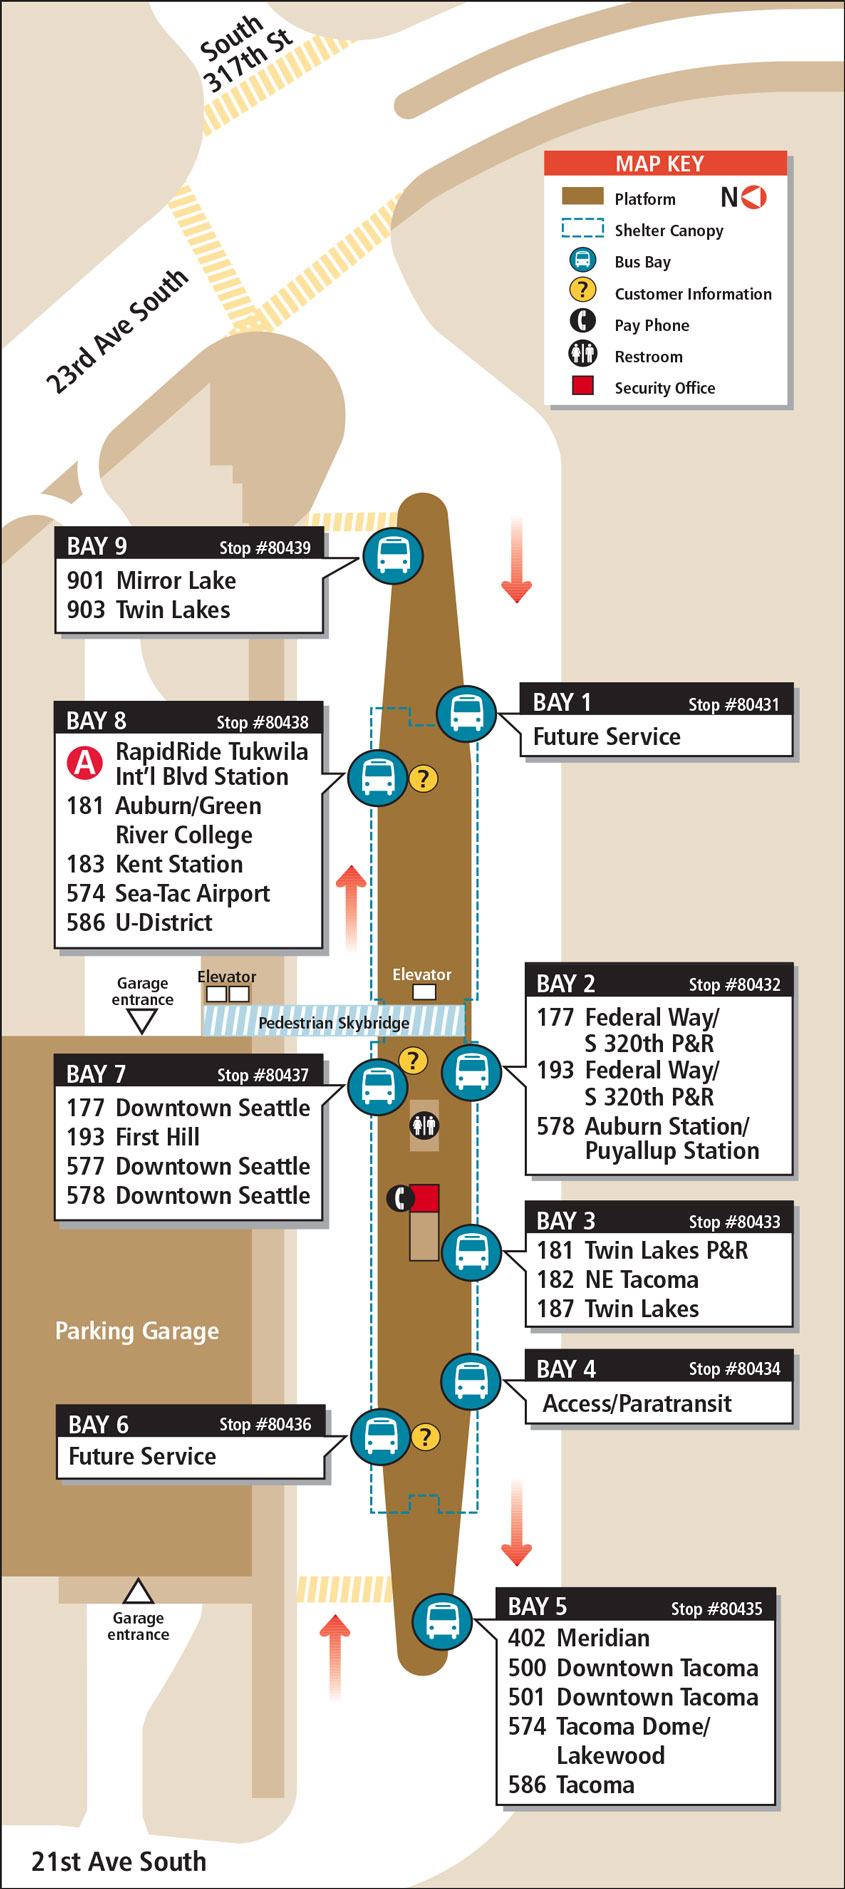 Federal Way Transit Center boarding location map